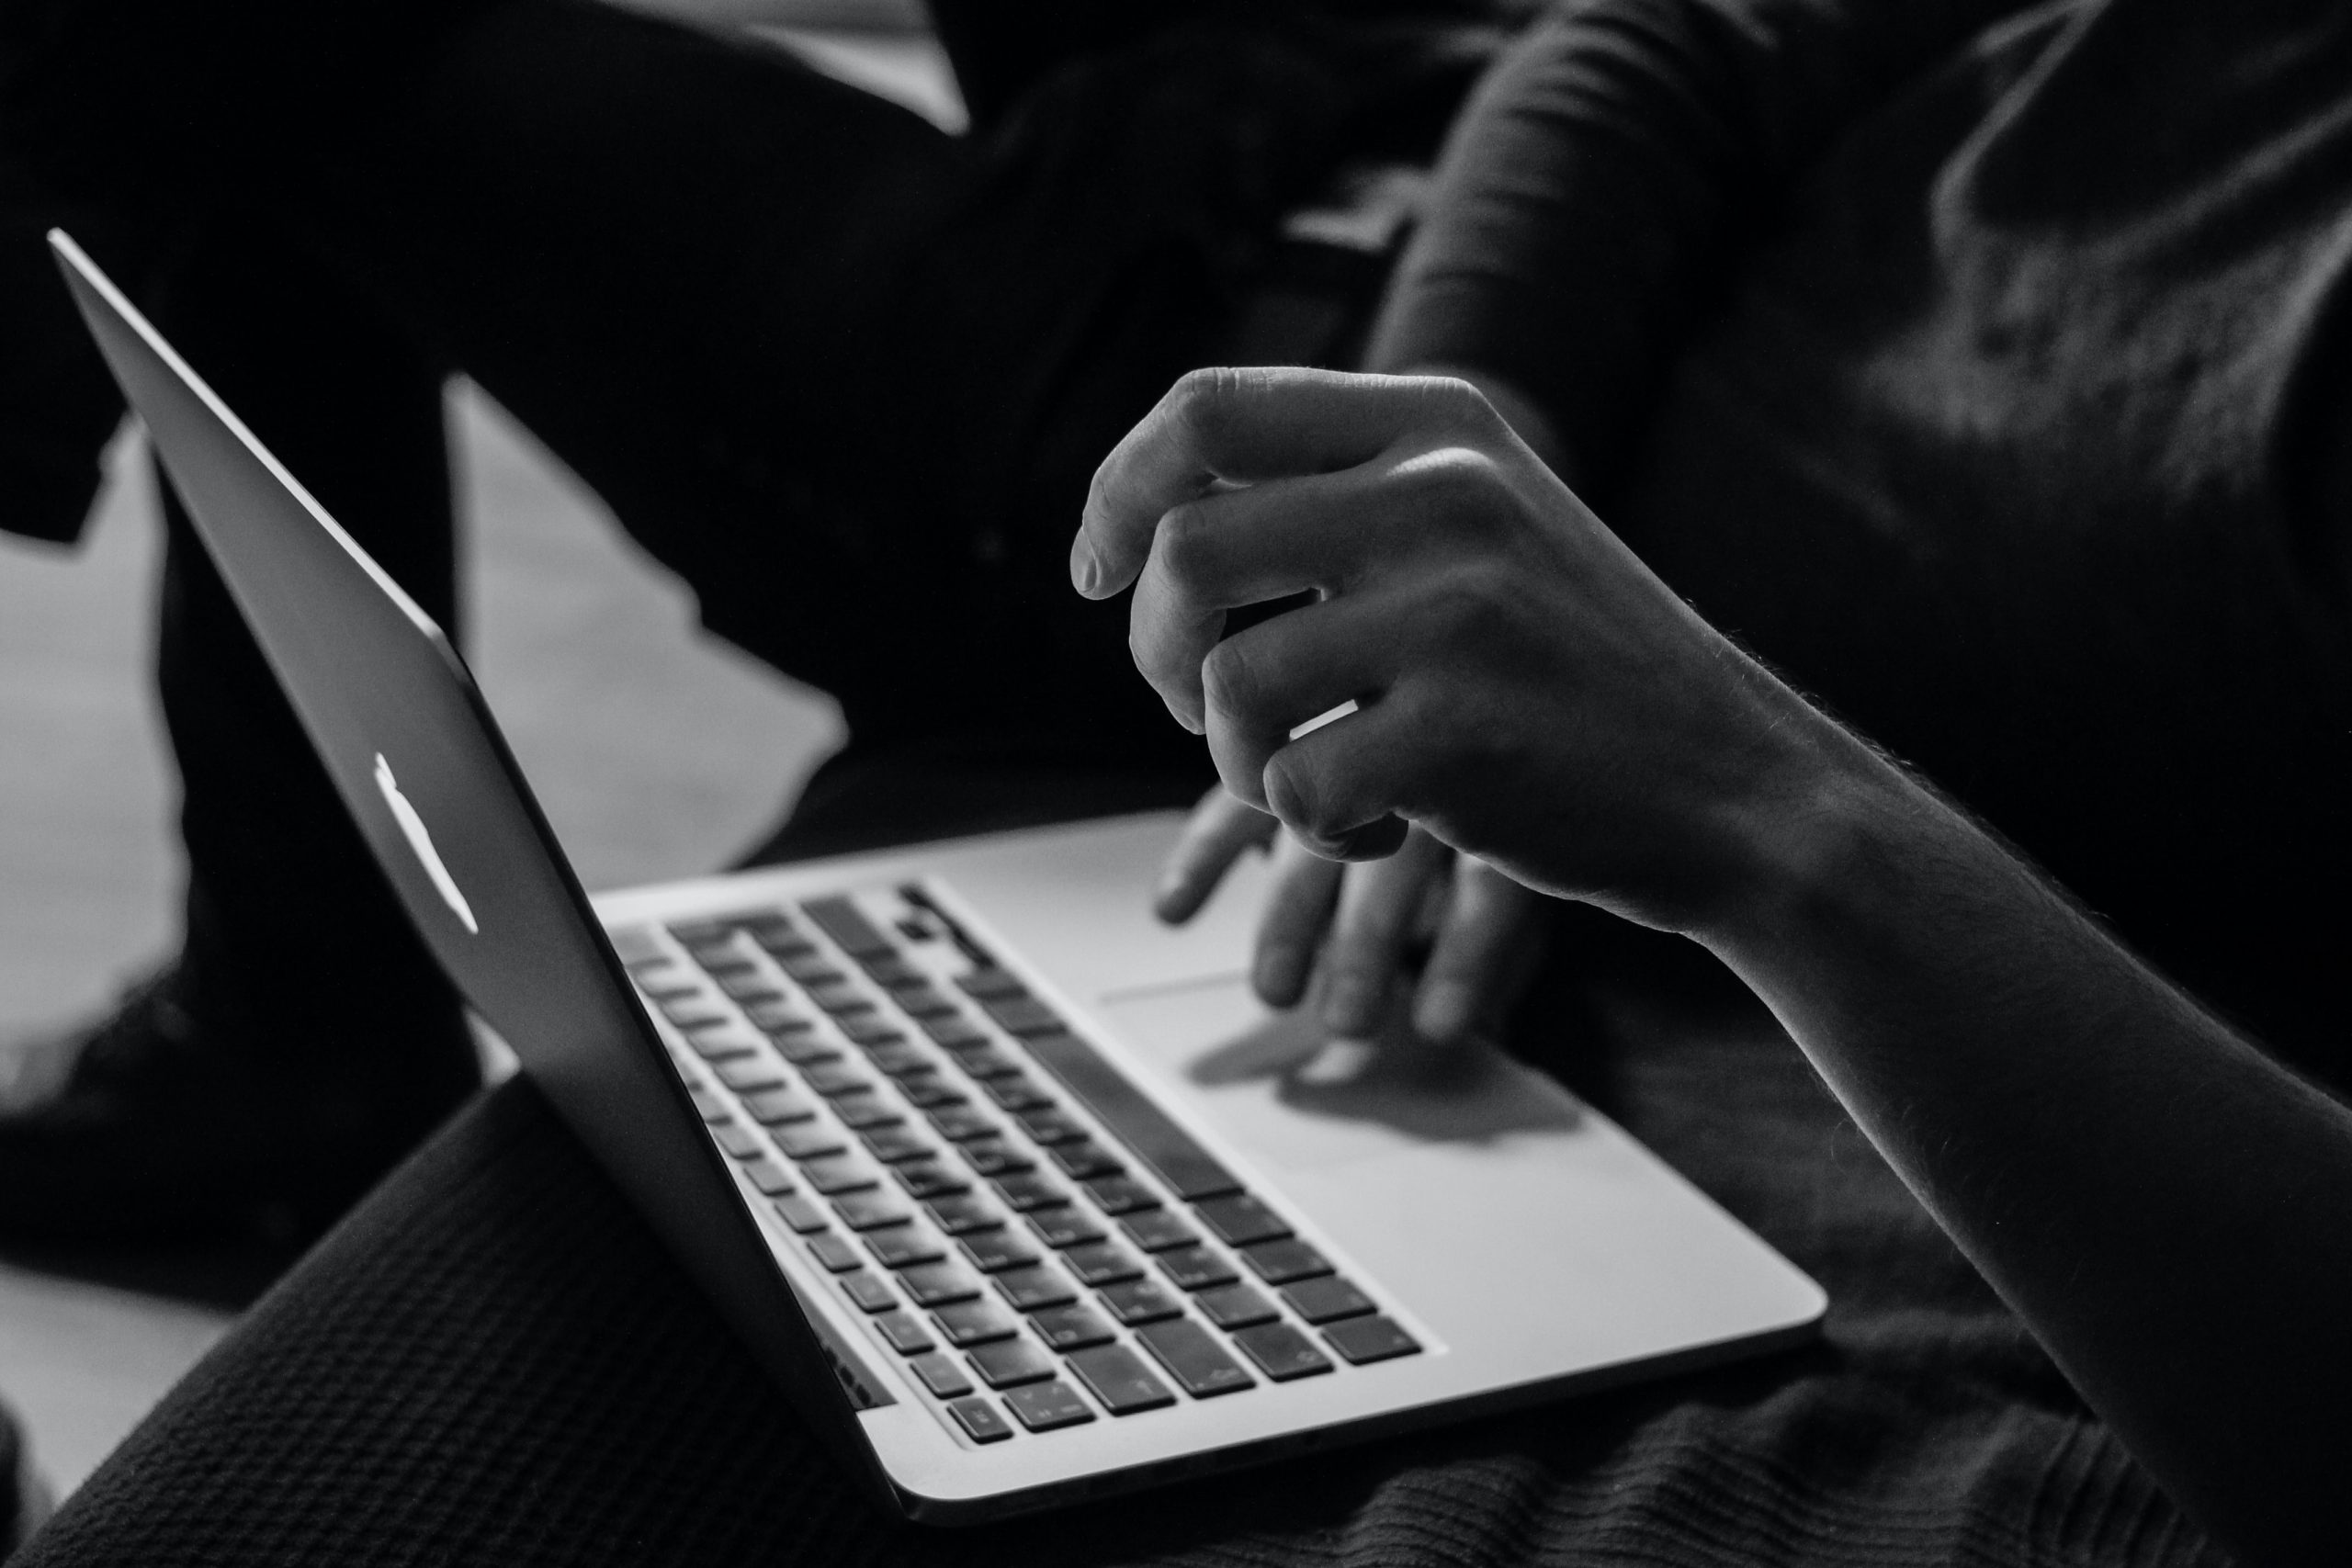 An monochrome image shows two black hands typing on a MacBook laptop. 